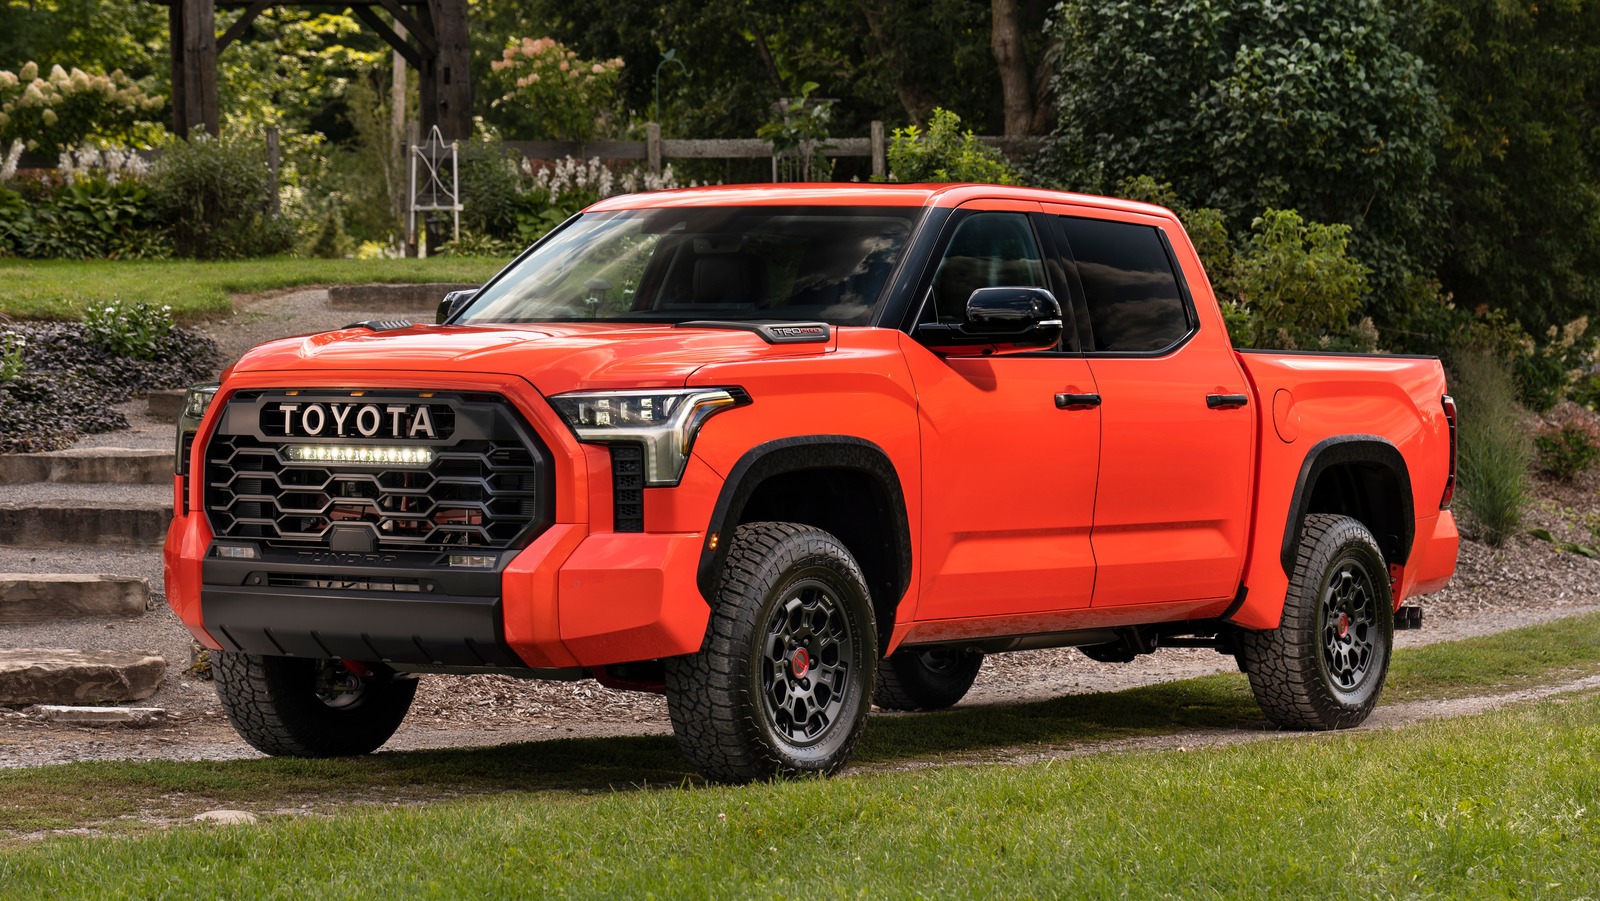 5 Hidden Easter Eggs You Can Find On The Toyota Tundra